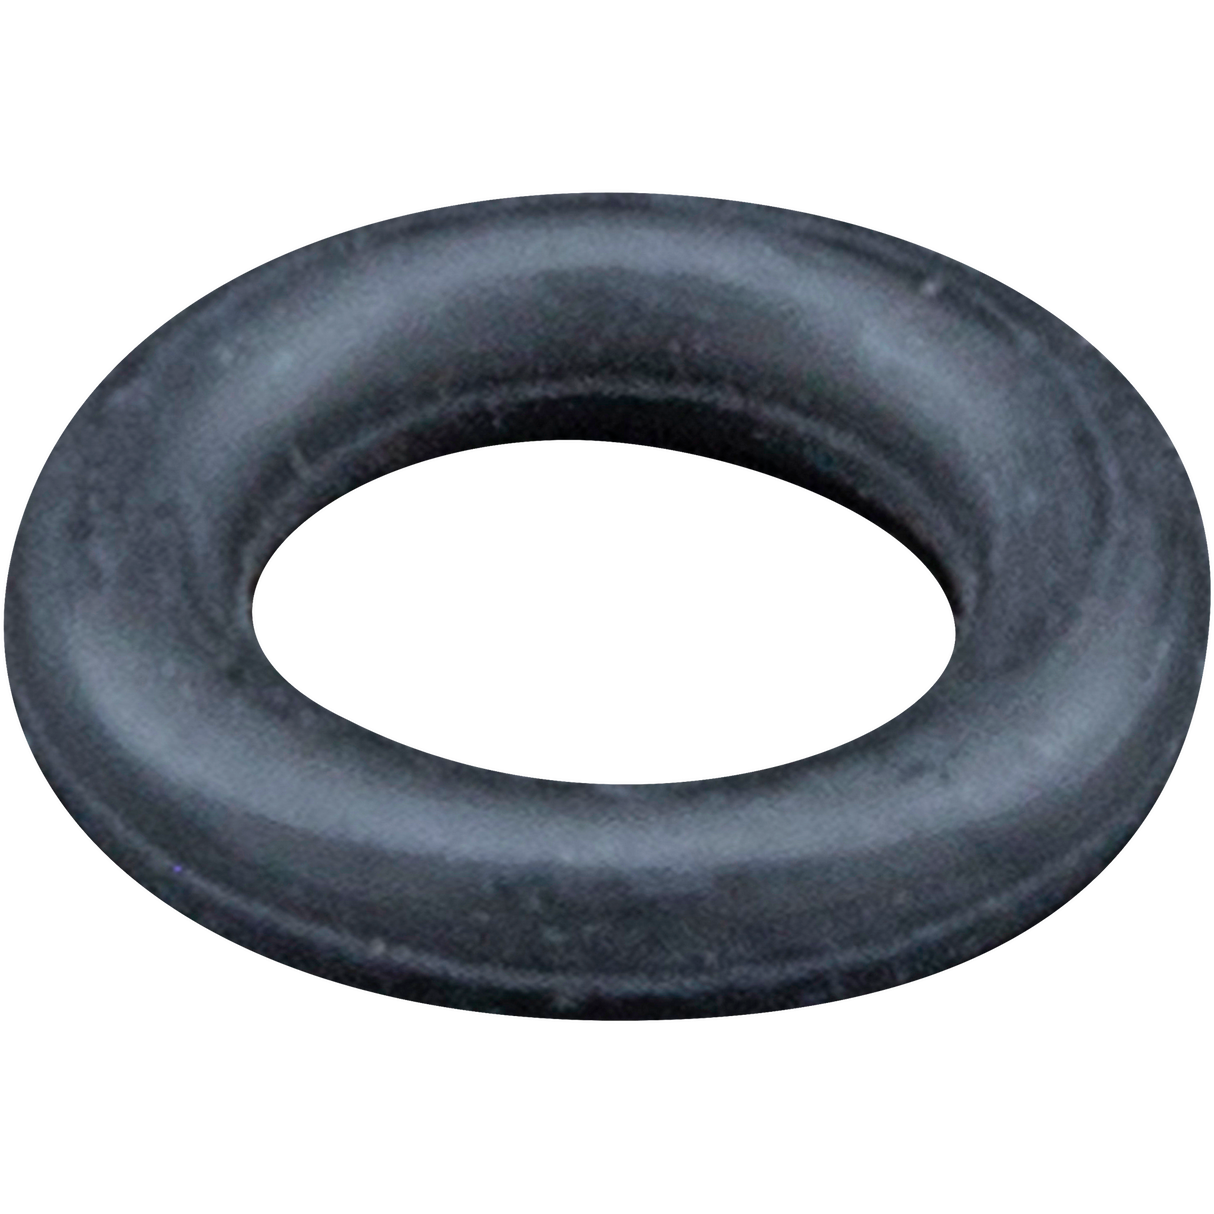 LA Pipes Rubber O-Ring for Grommet Joint Bongs, 3 Pack, Durable Material, Top View